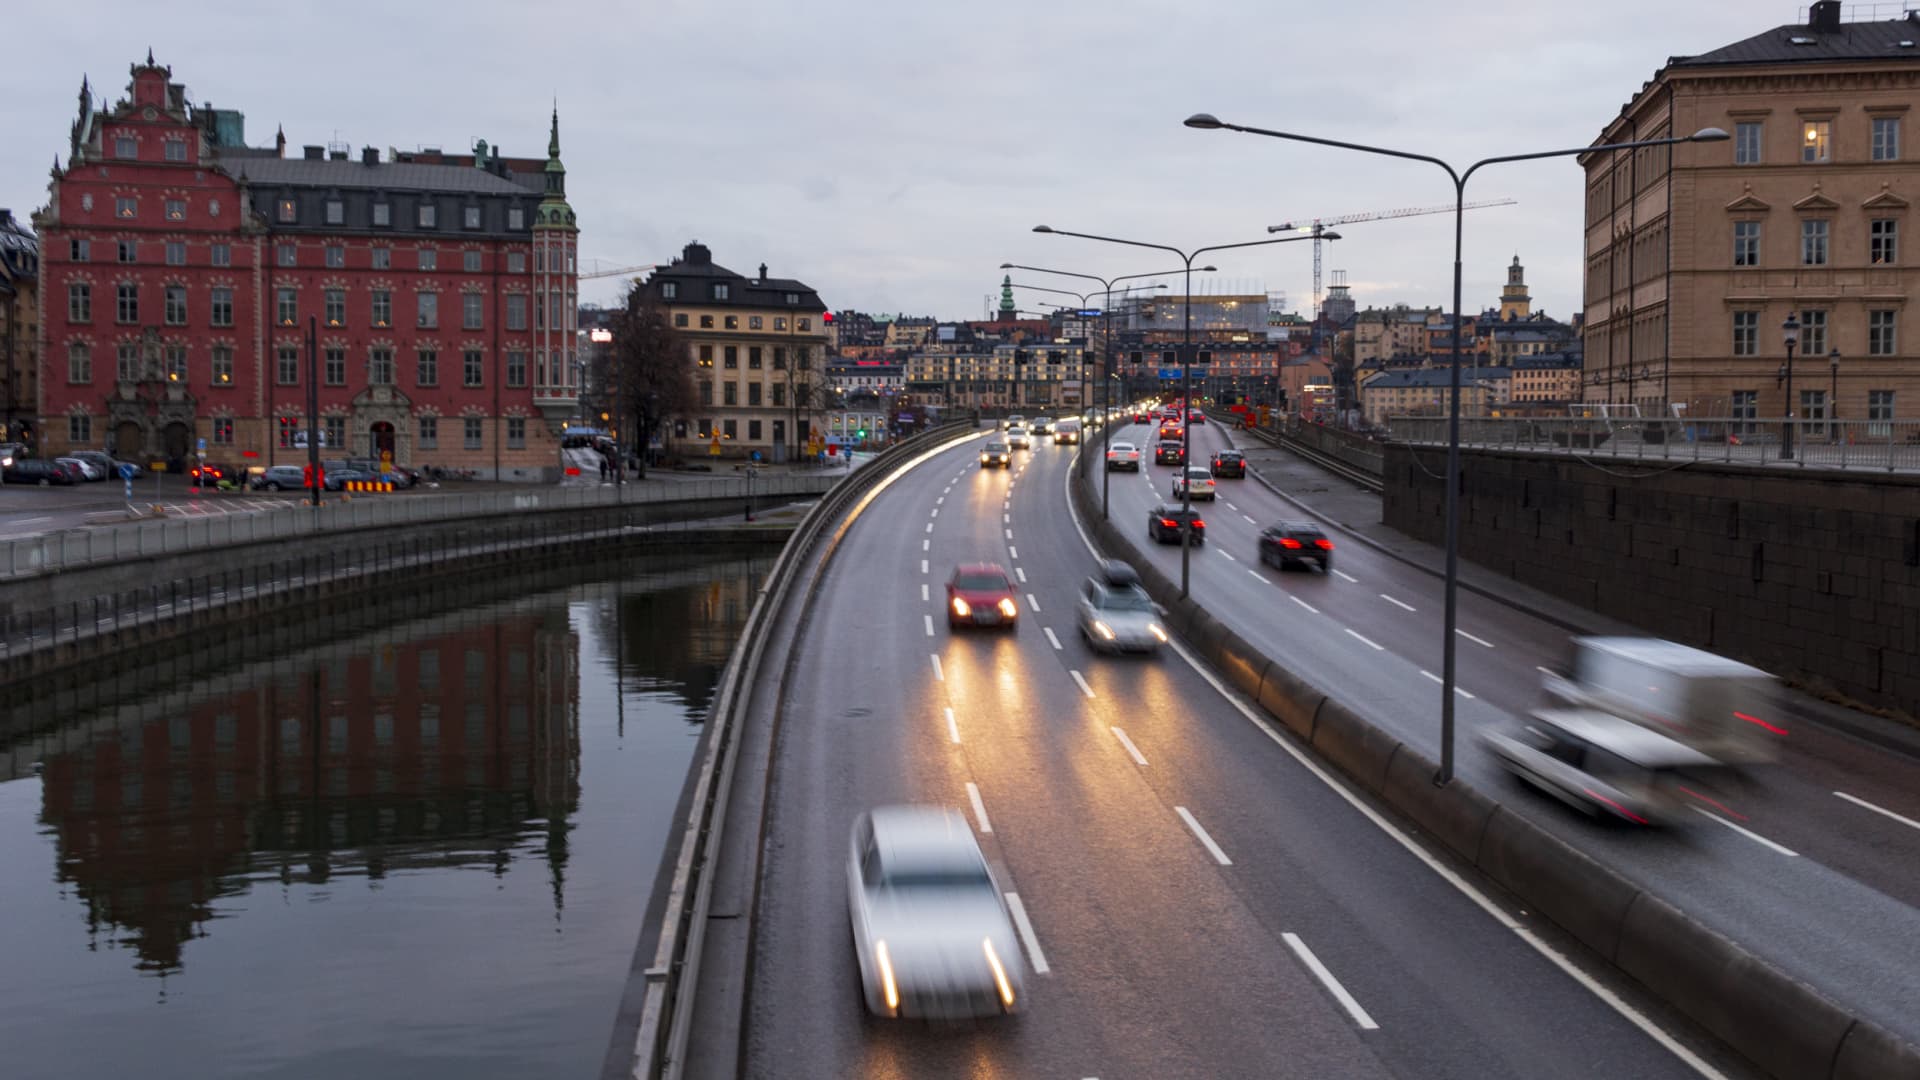 Stockholm bans diesel and gas powered cars from driving downtown starting 2025